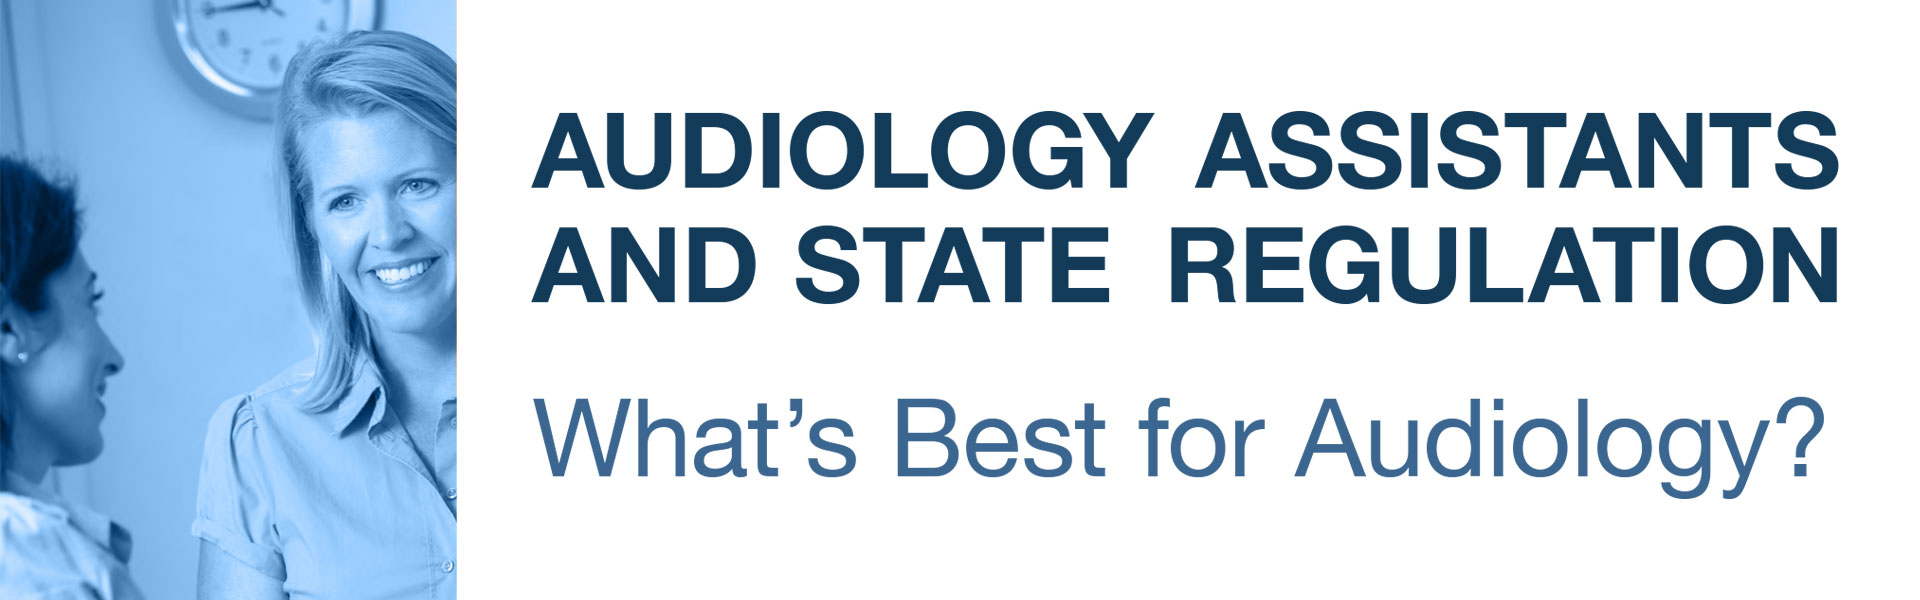 Audiology Assistants and State Regulation: What's Best for Audiology?